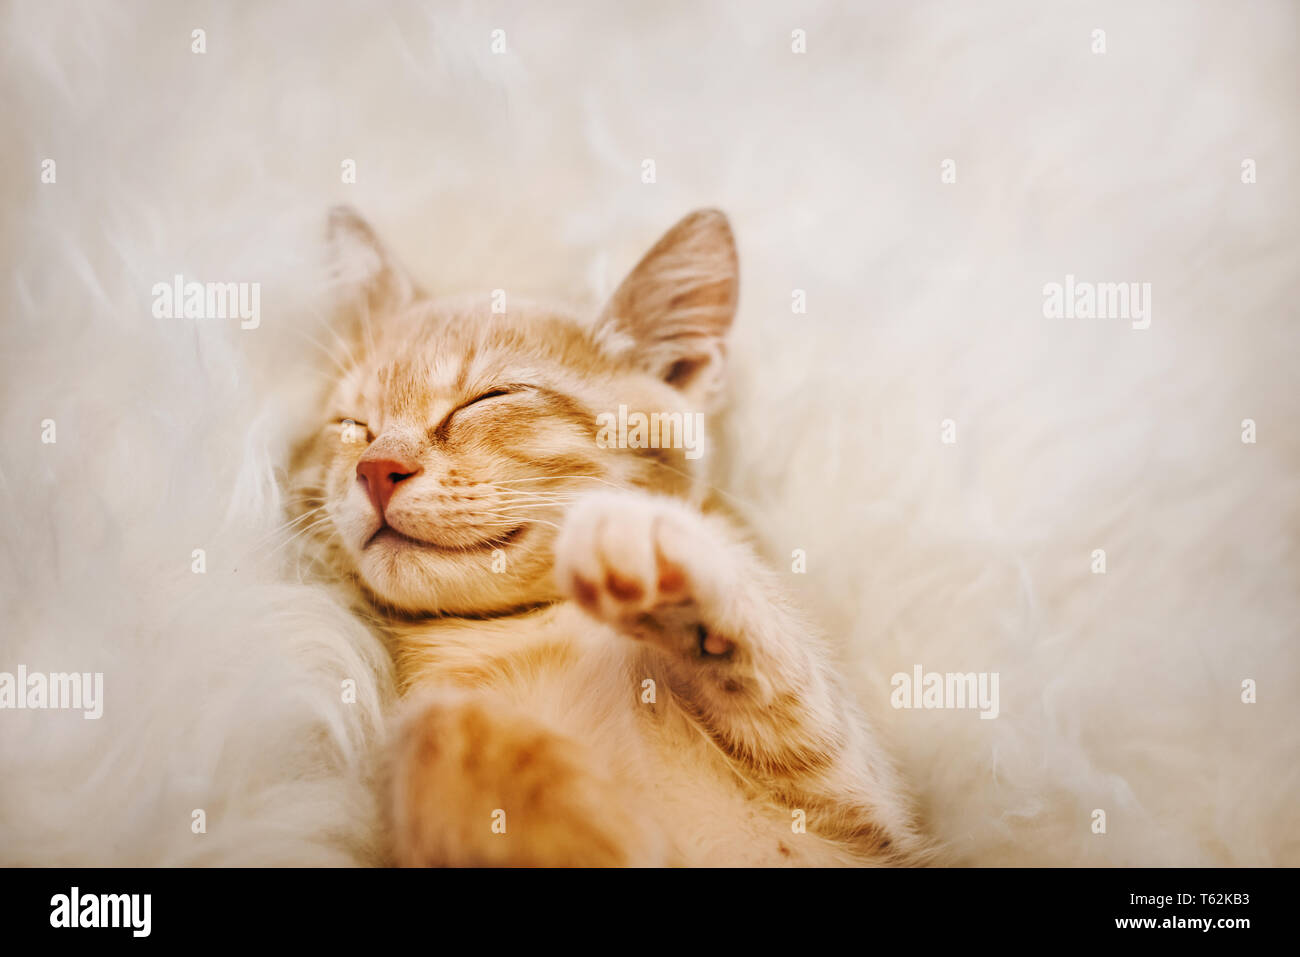 Cute, red kitten is sleeping on his back and smiling, paws up. Concept of sleep and good morning. Stock Photo